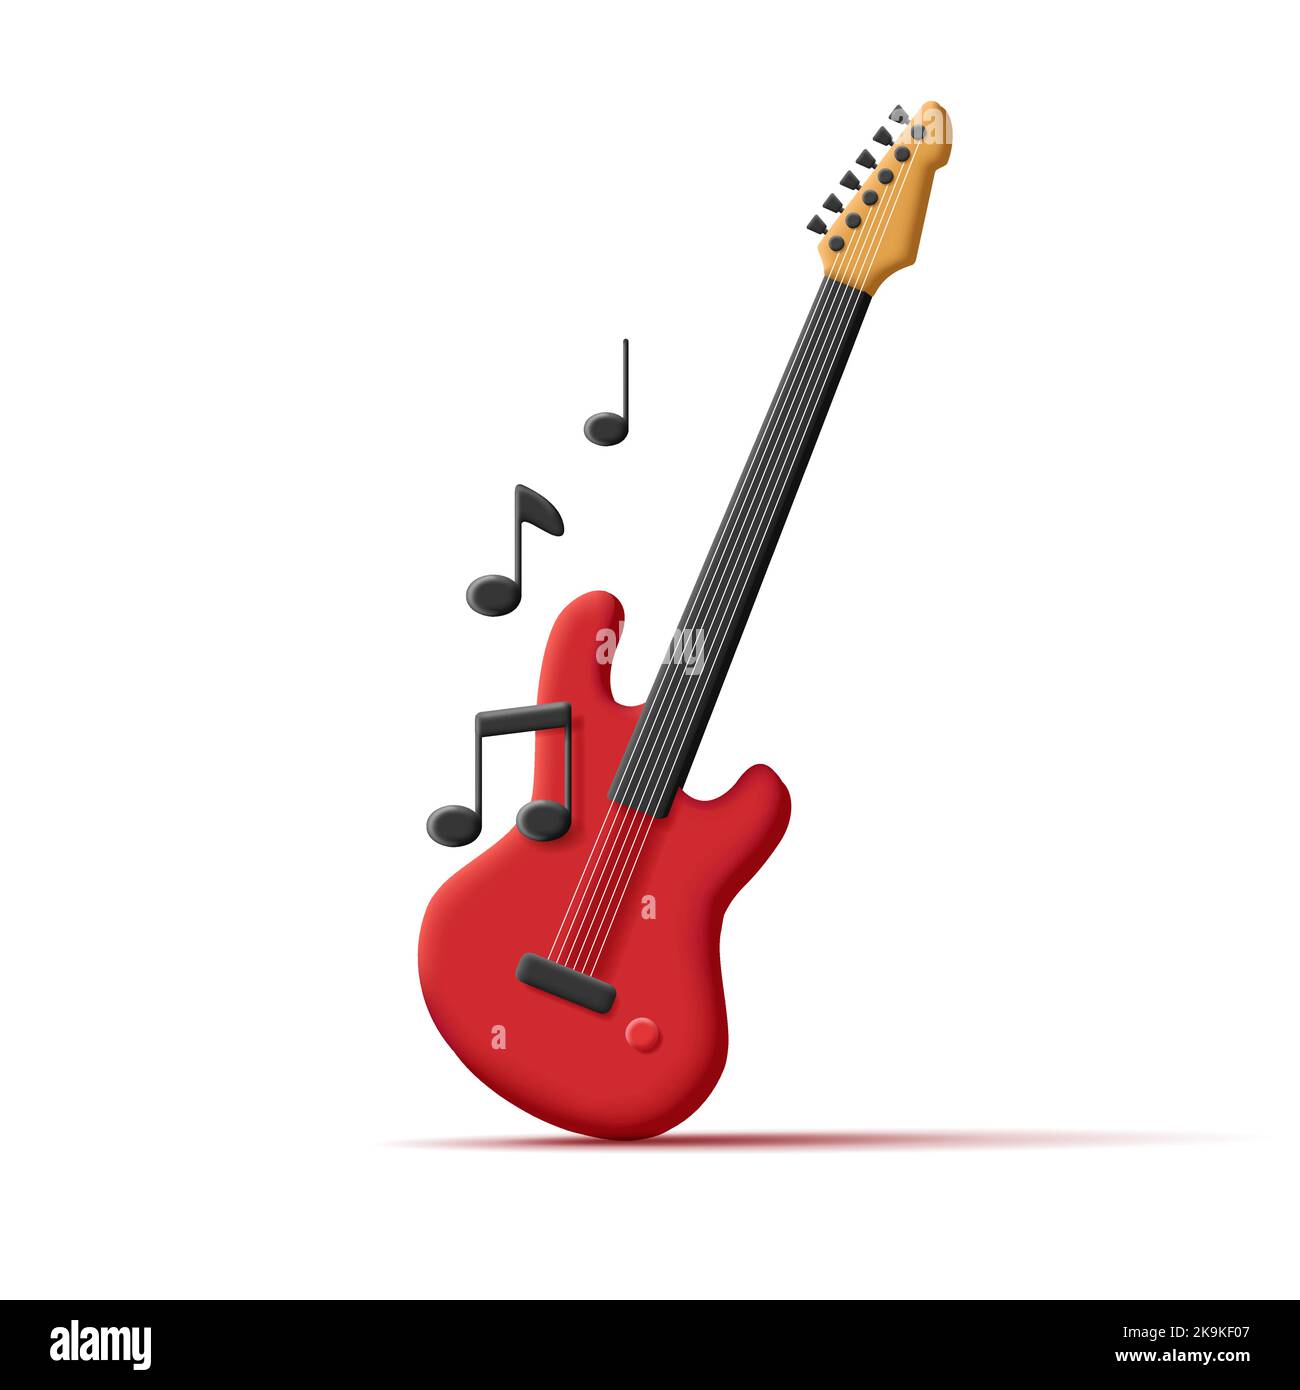 Bass Guitar. Musical instrument 3d render red shape with black